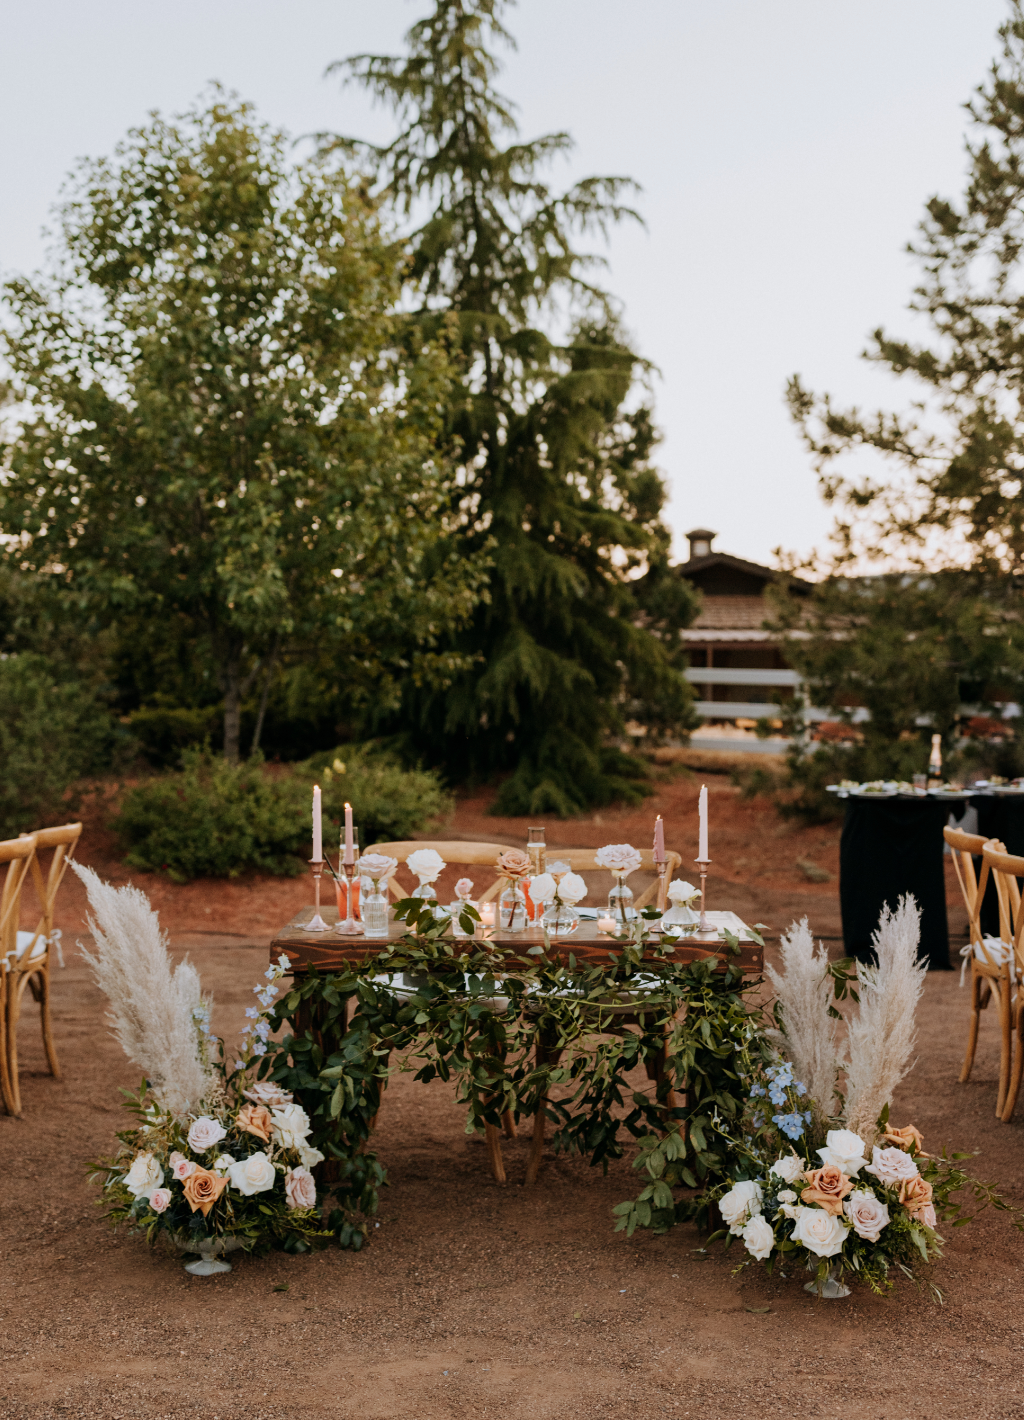 Sweetheart table florals set up before the reception in a desert setting